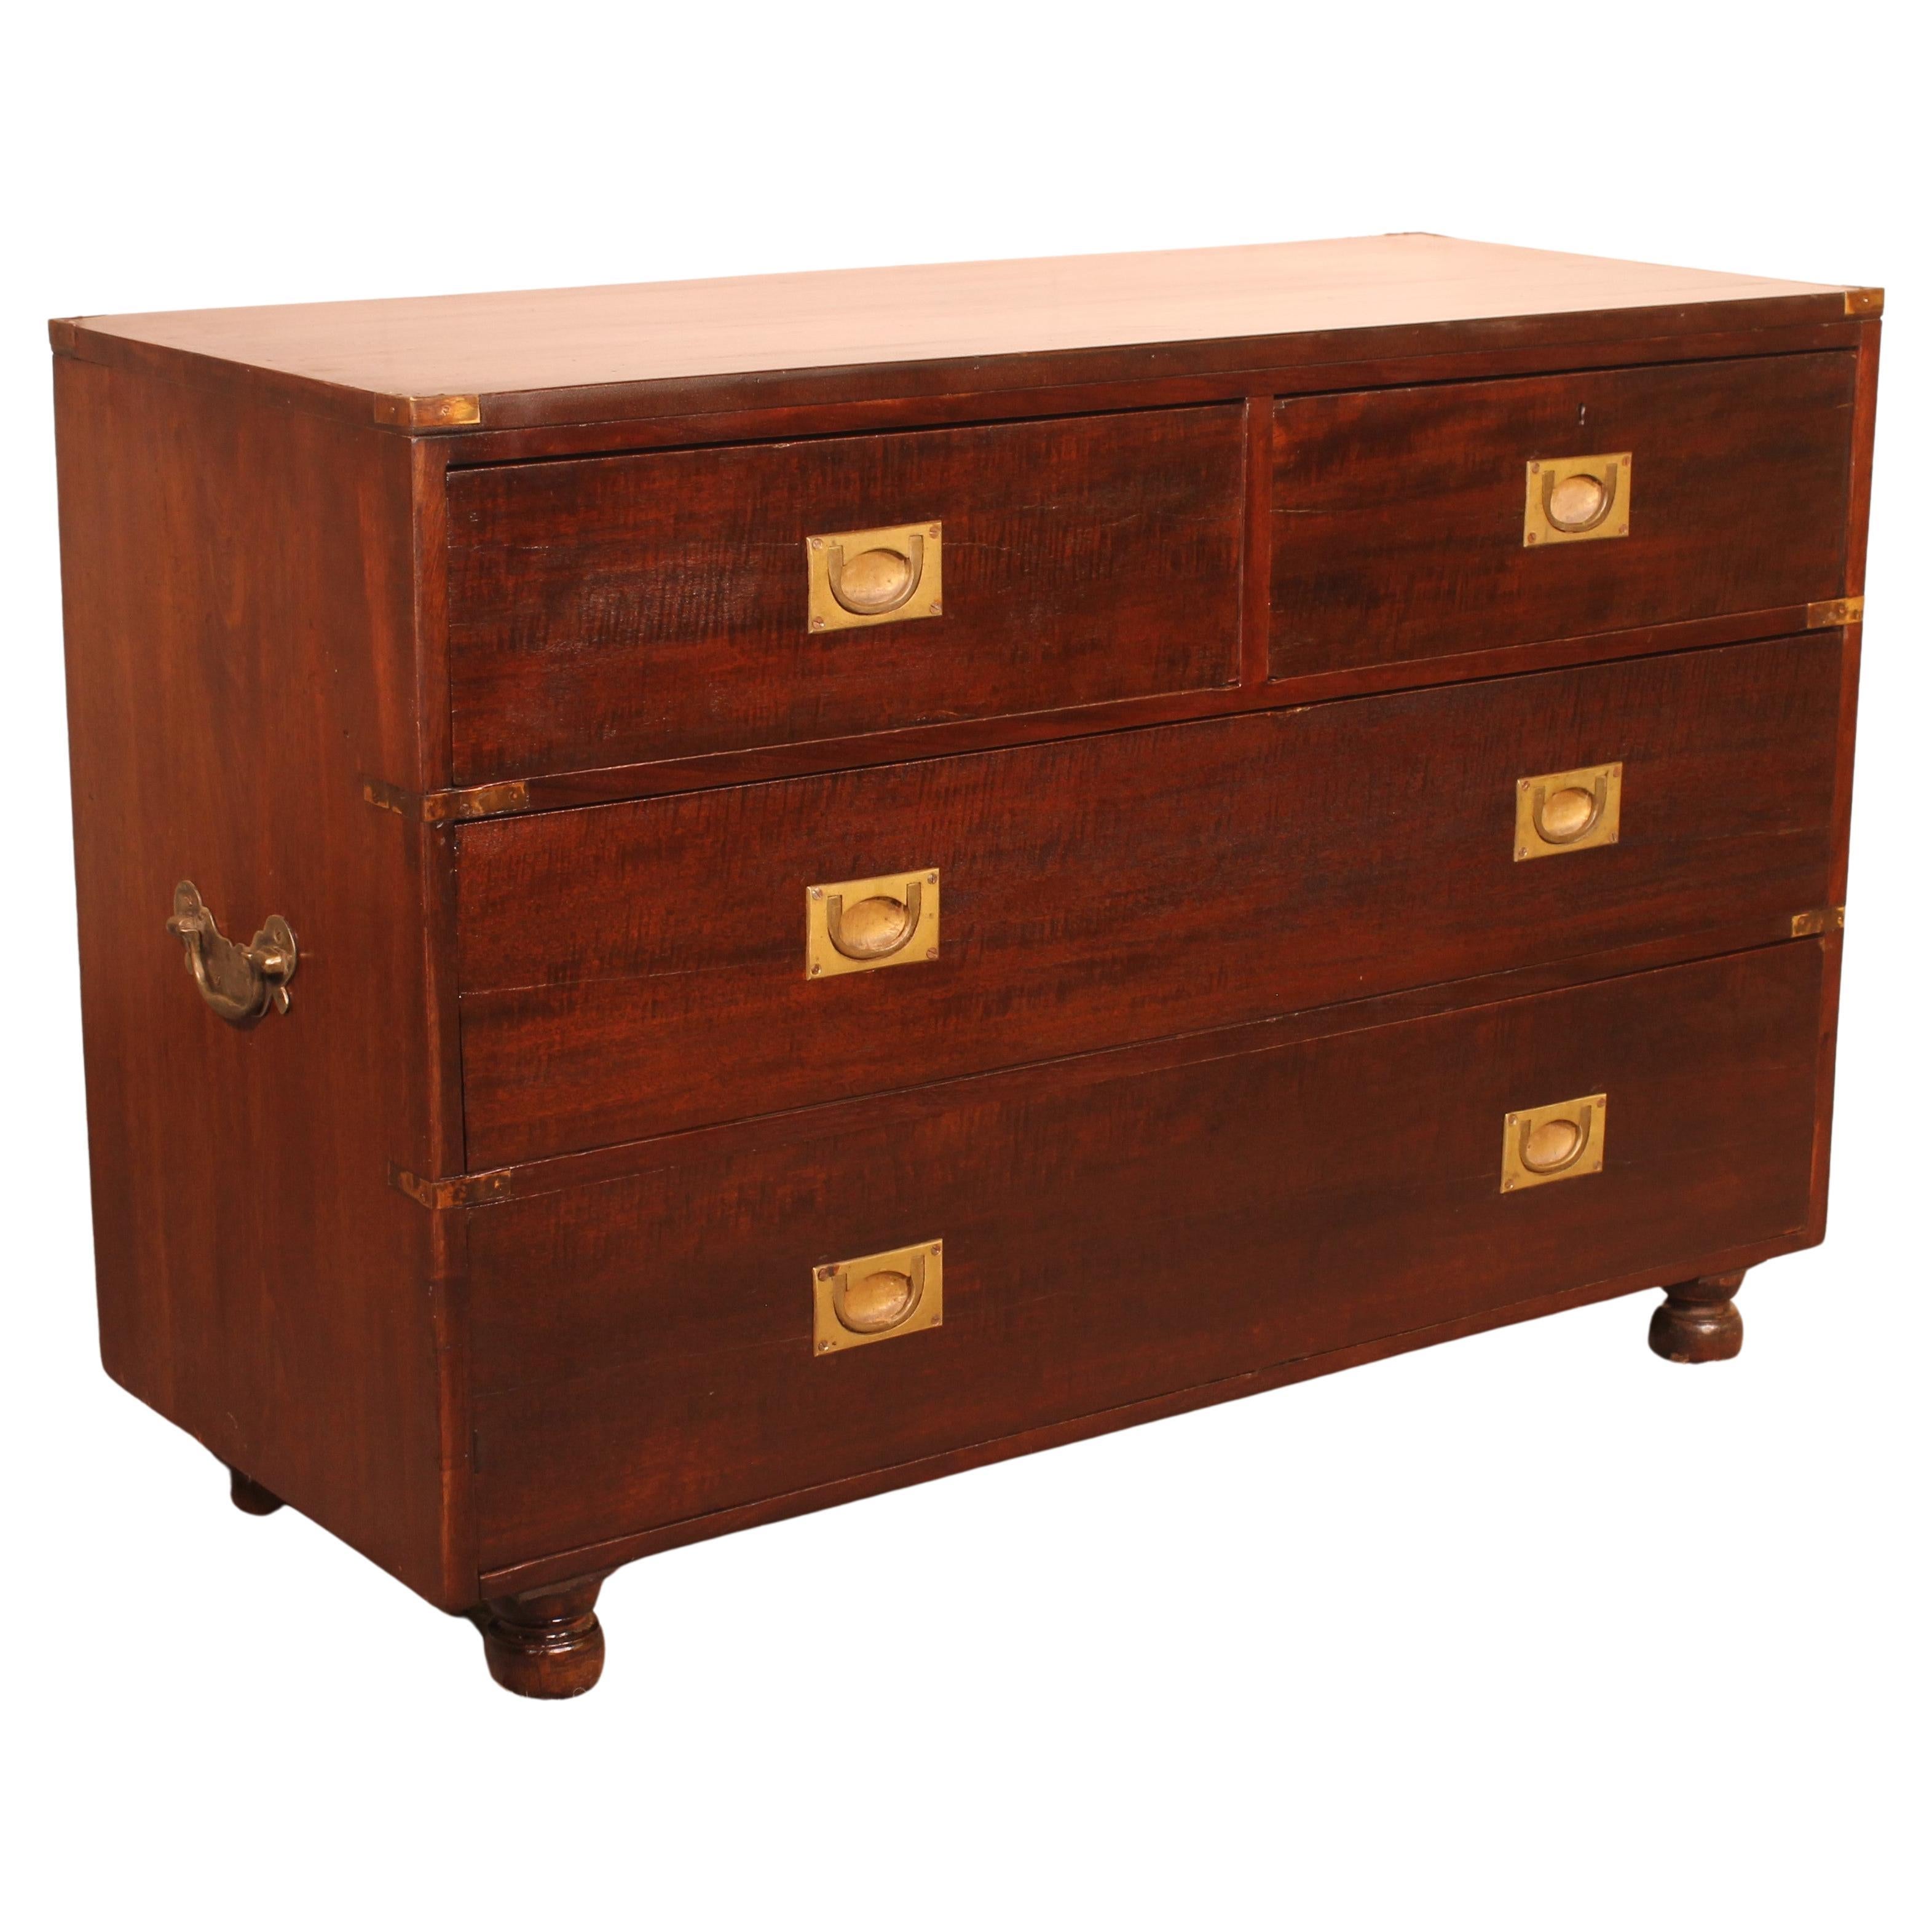 Campaign / Marine Chest of Drawers in Mahogany from the 19 ° Century